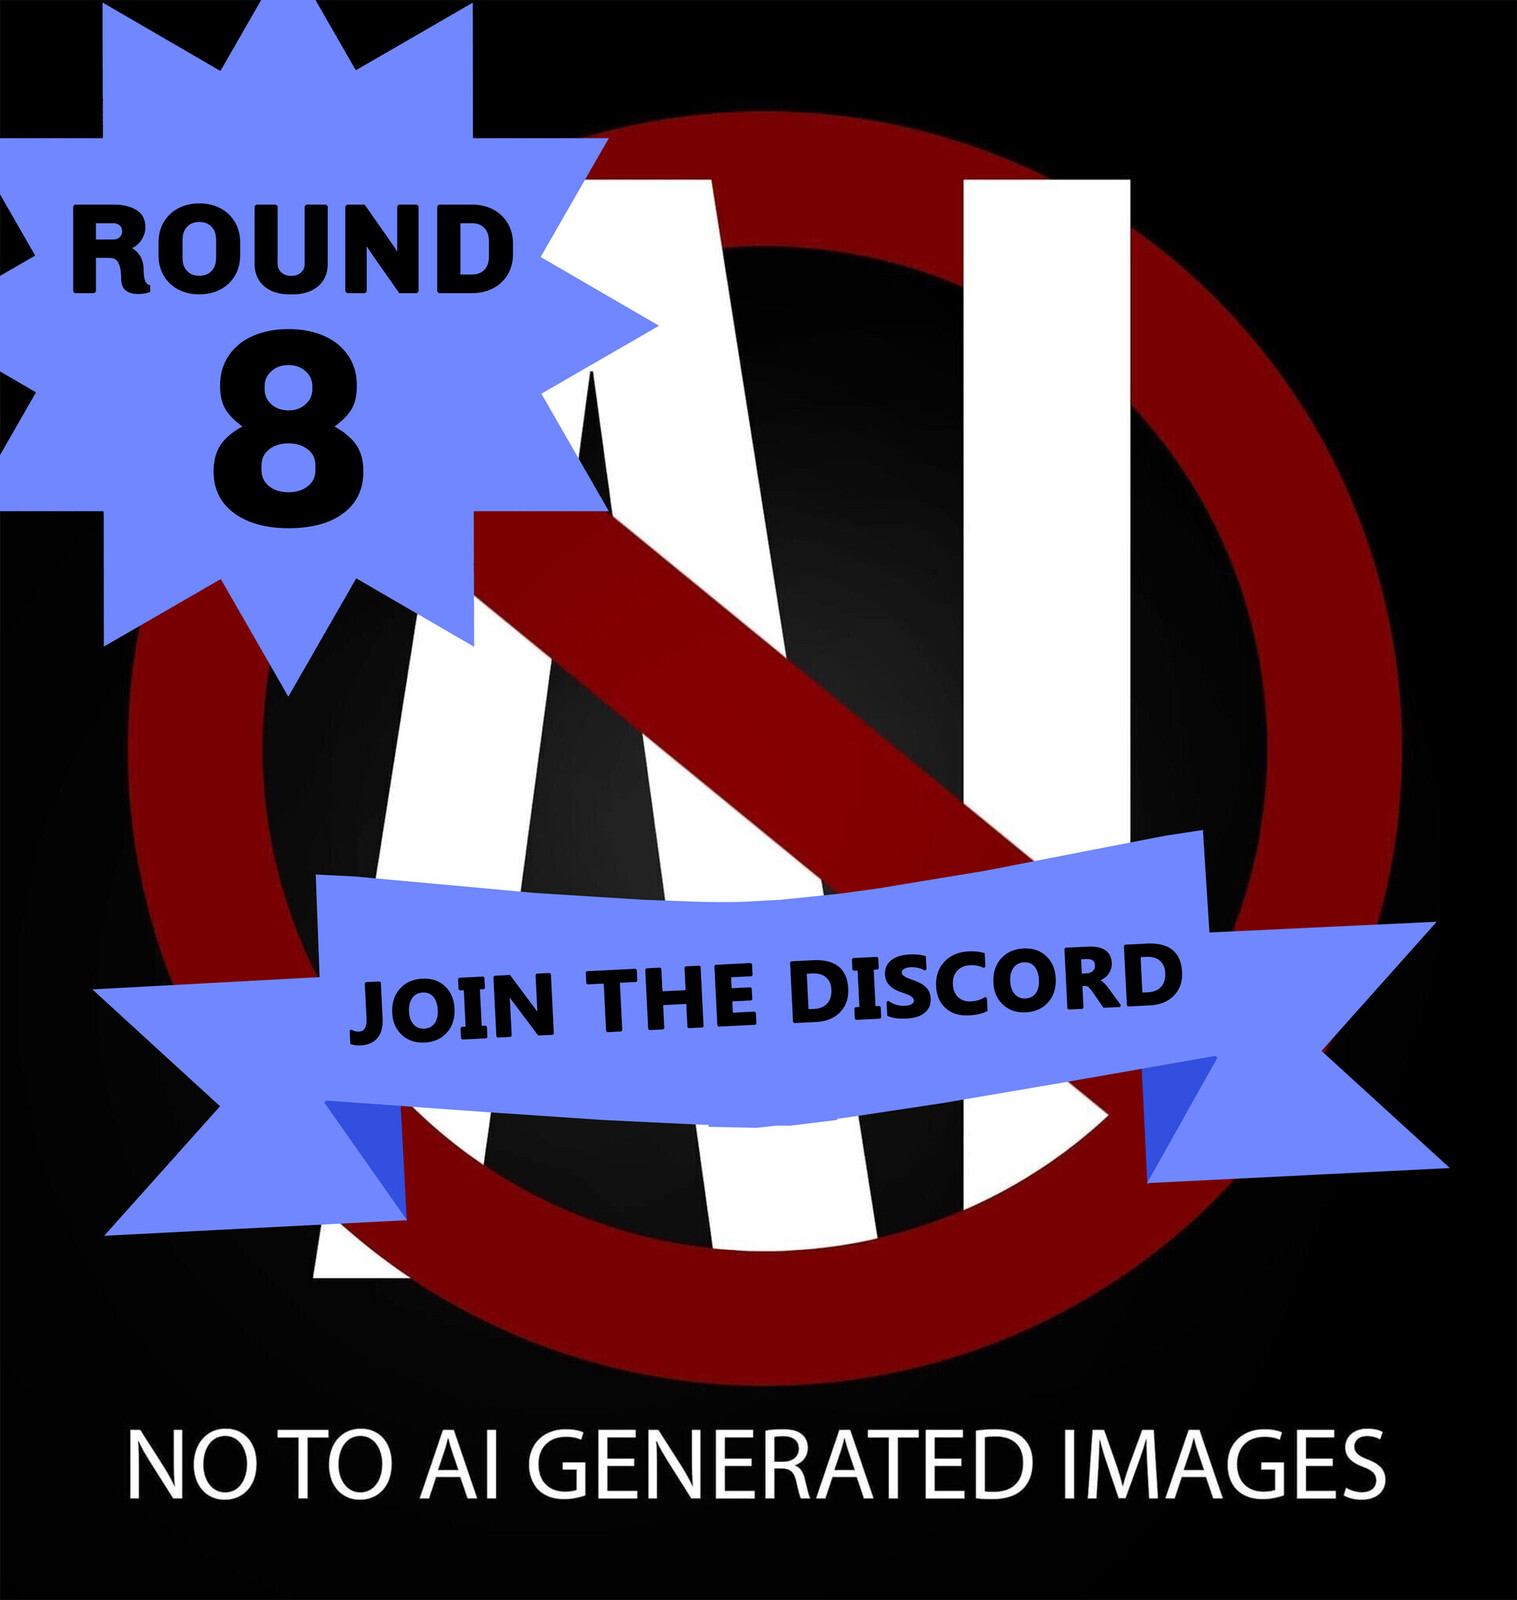 Round 8 of the No to Ai Protests, if you would like to organize, discuss and do more for the art community then join the NO-AI discord server via this link: https://discord.gg/7cAAEtzs